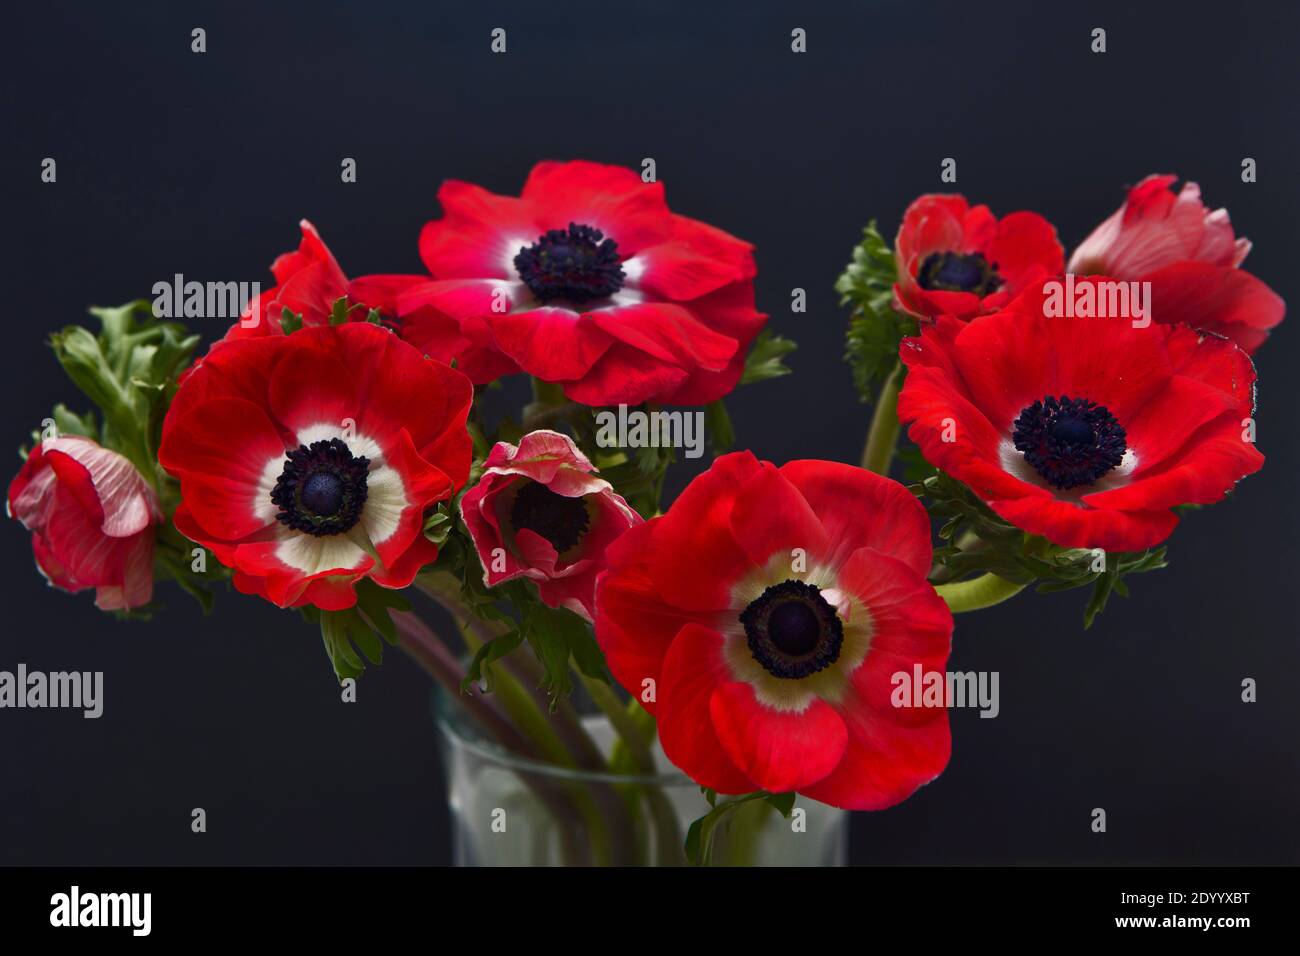 A bouquet of red anemones in a transparent glass vase on a table with a gray tablecloth. White polka dot red cup with tea and towel. Morning Stock Photo